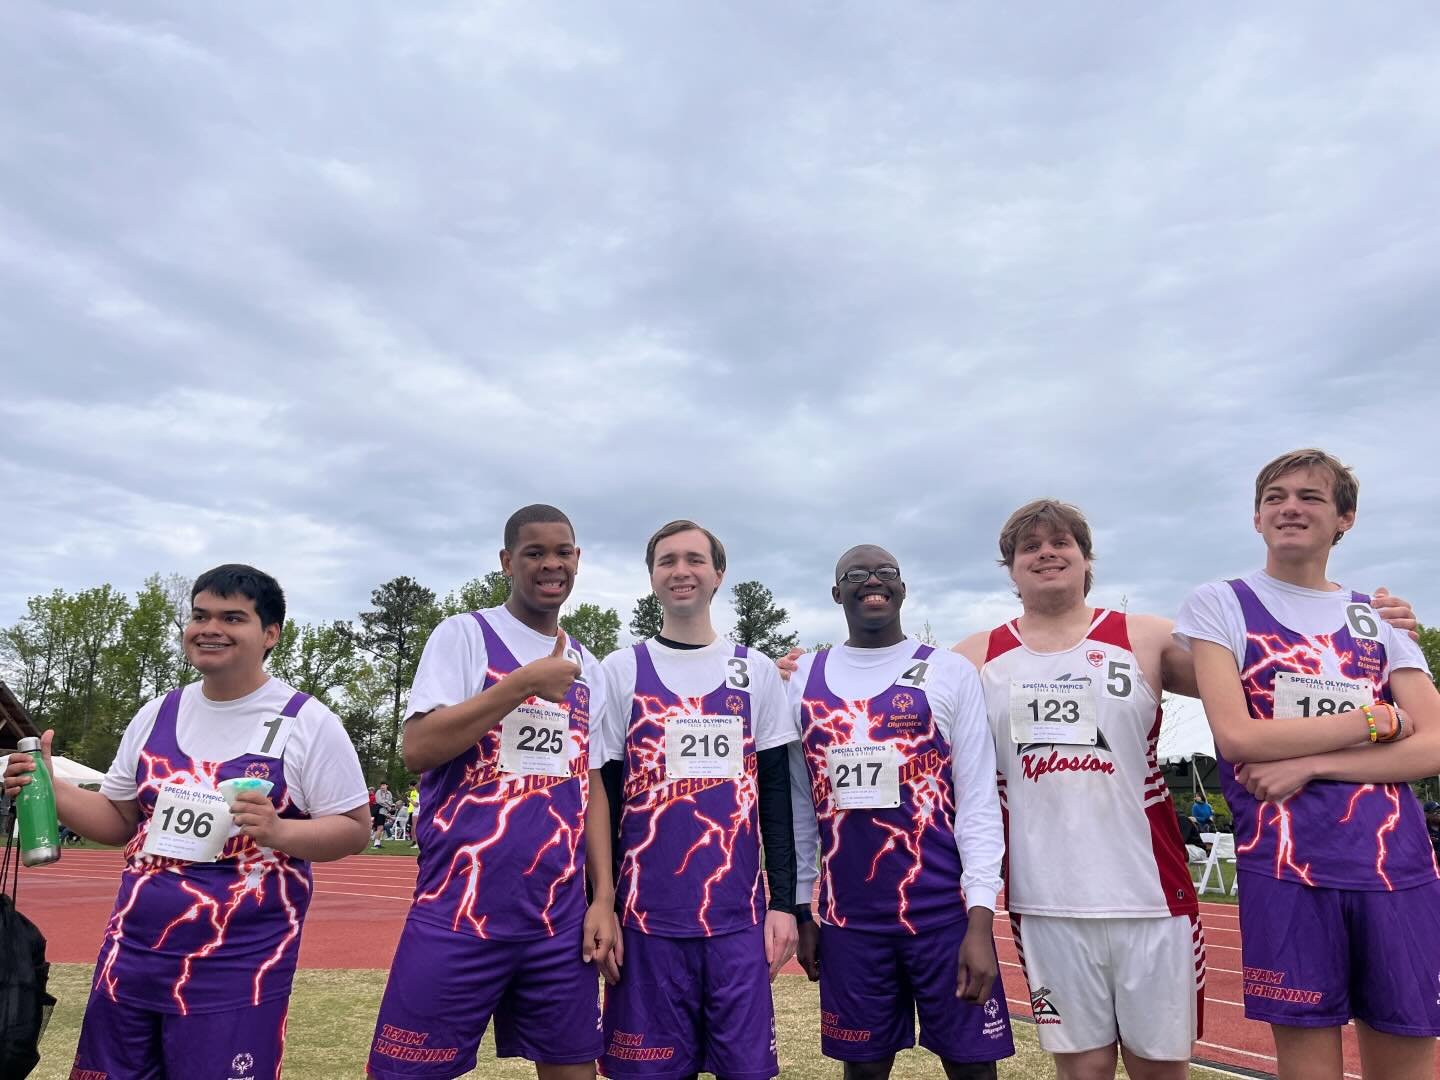 This past weekend we had the opportunity to help out with the annual Virginia Special Olympics at Episcopal High School! Our volunteers joined the athletes in completing their track and field events, it was an exciting day! Thank you @specialolympics